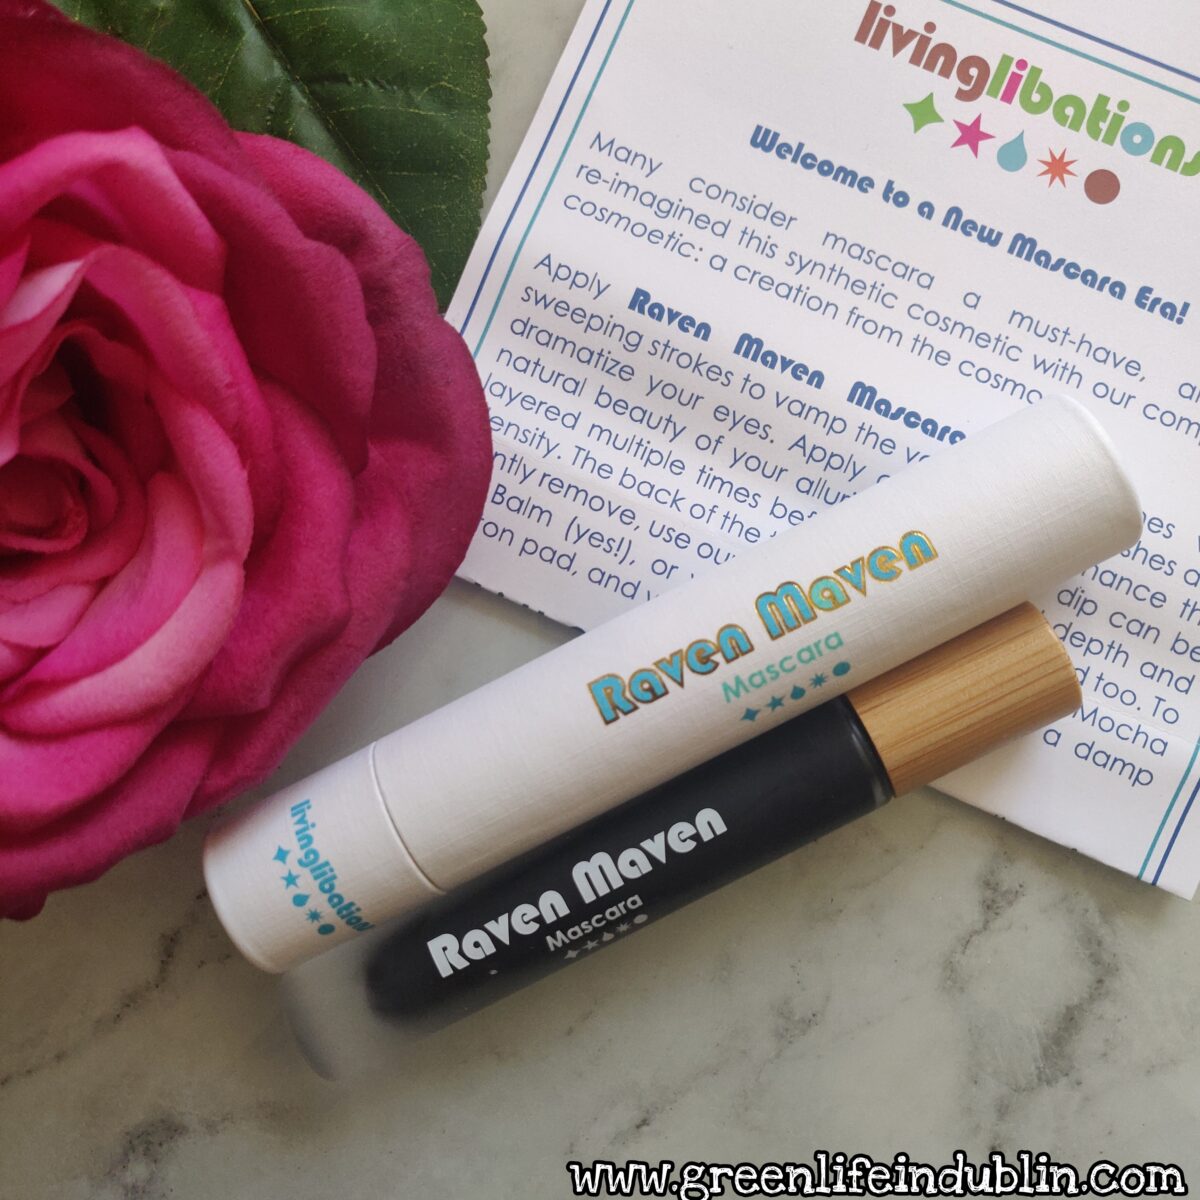 Living Libations Raven Maven Mascara first impressions review – Green Life In Dublin